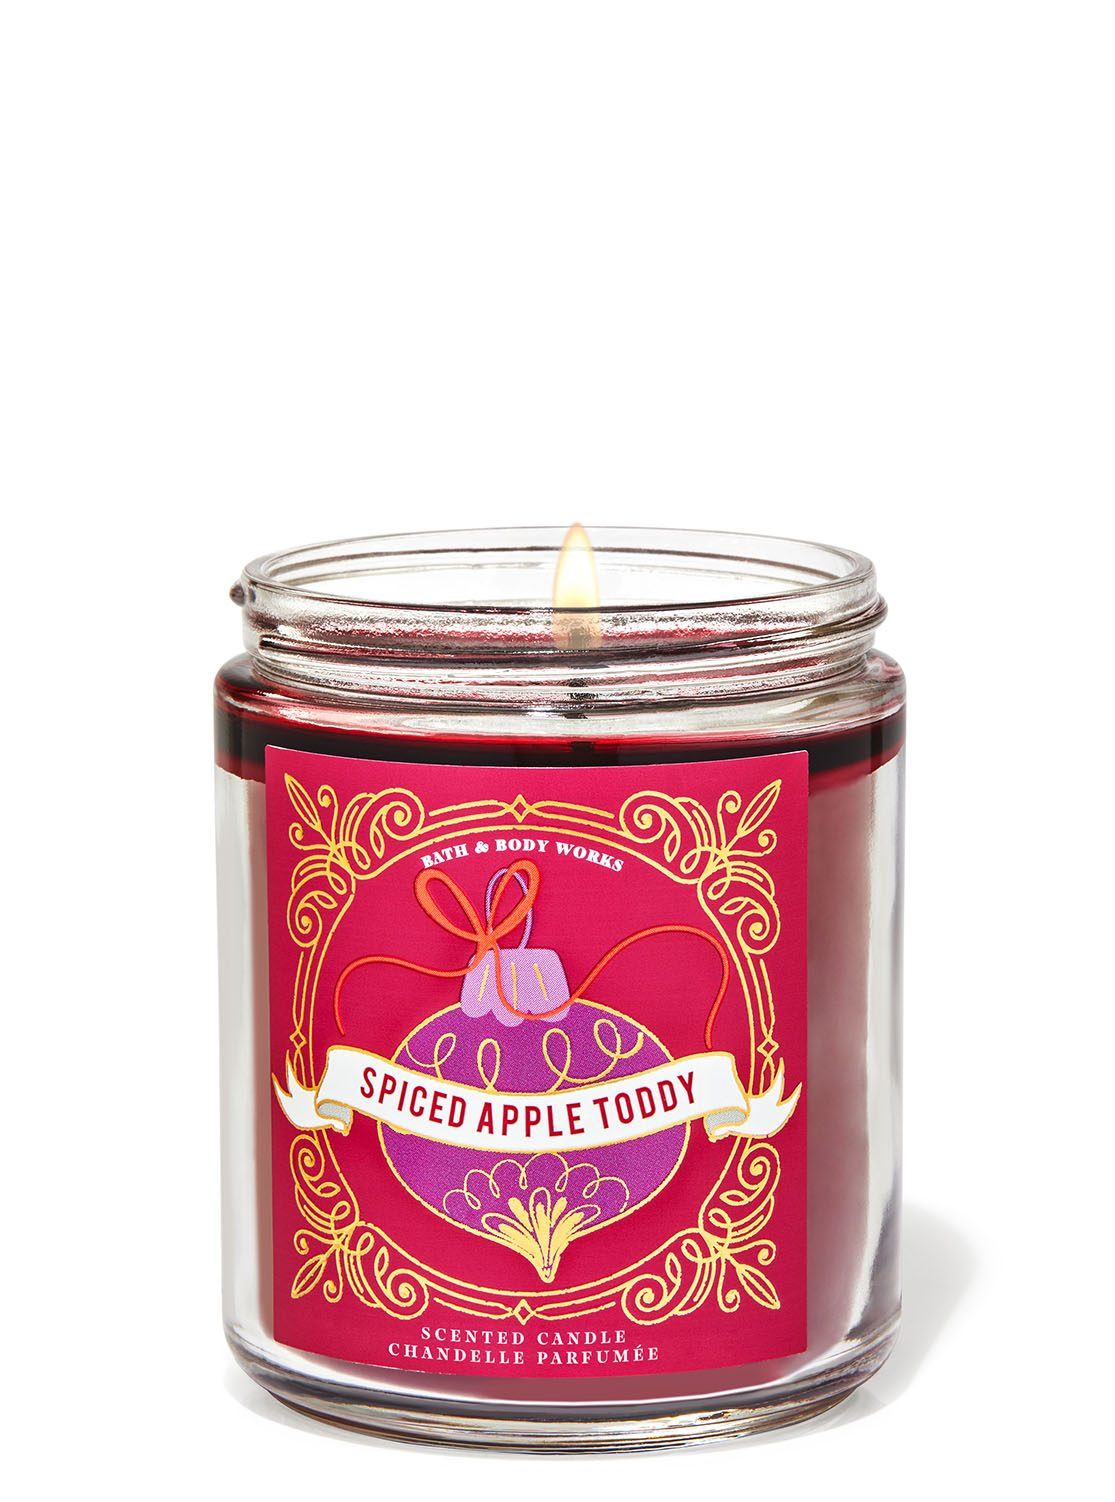 Spiced Apple Toddy Single Wick Candle | Bath and Body Works